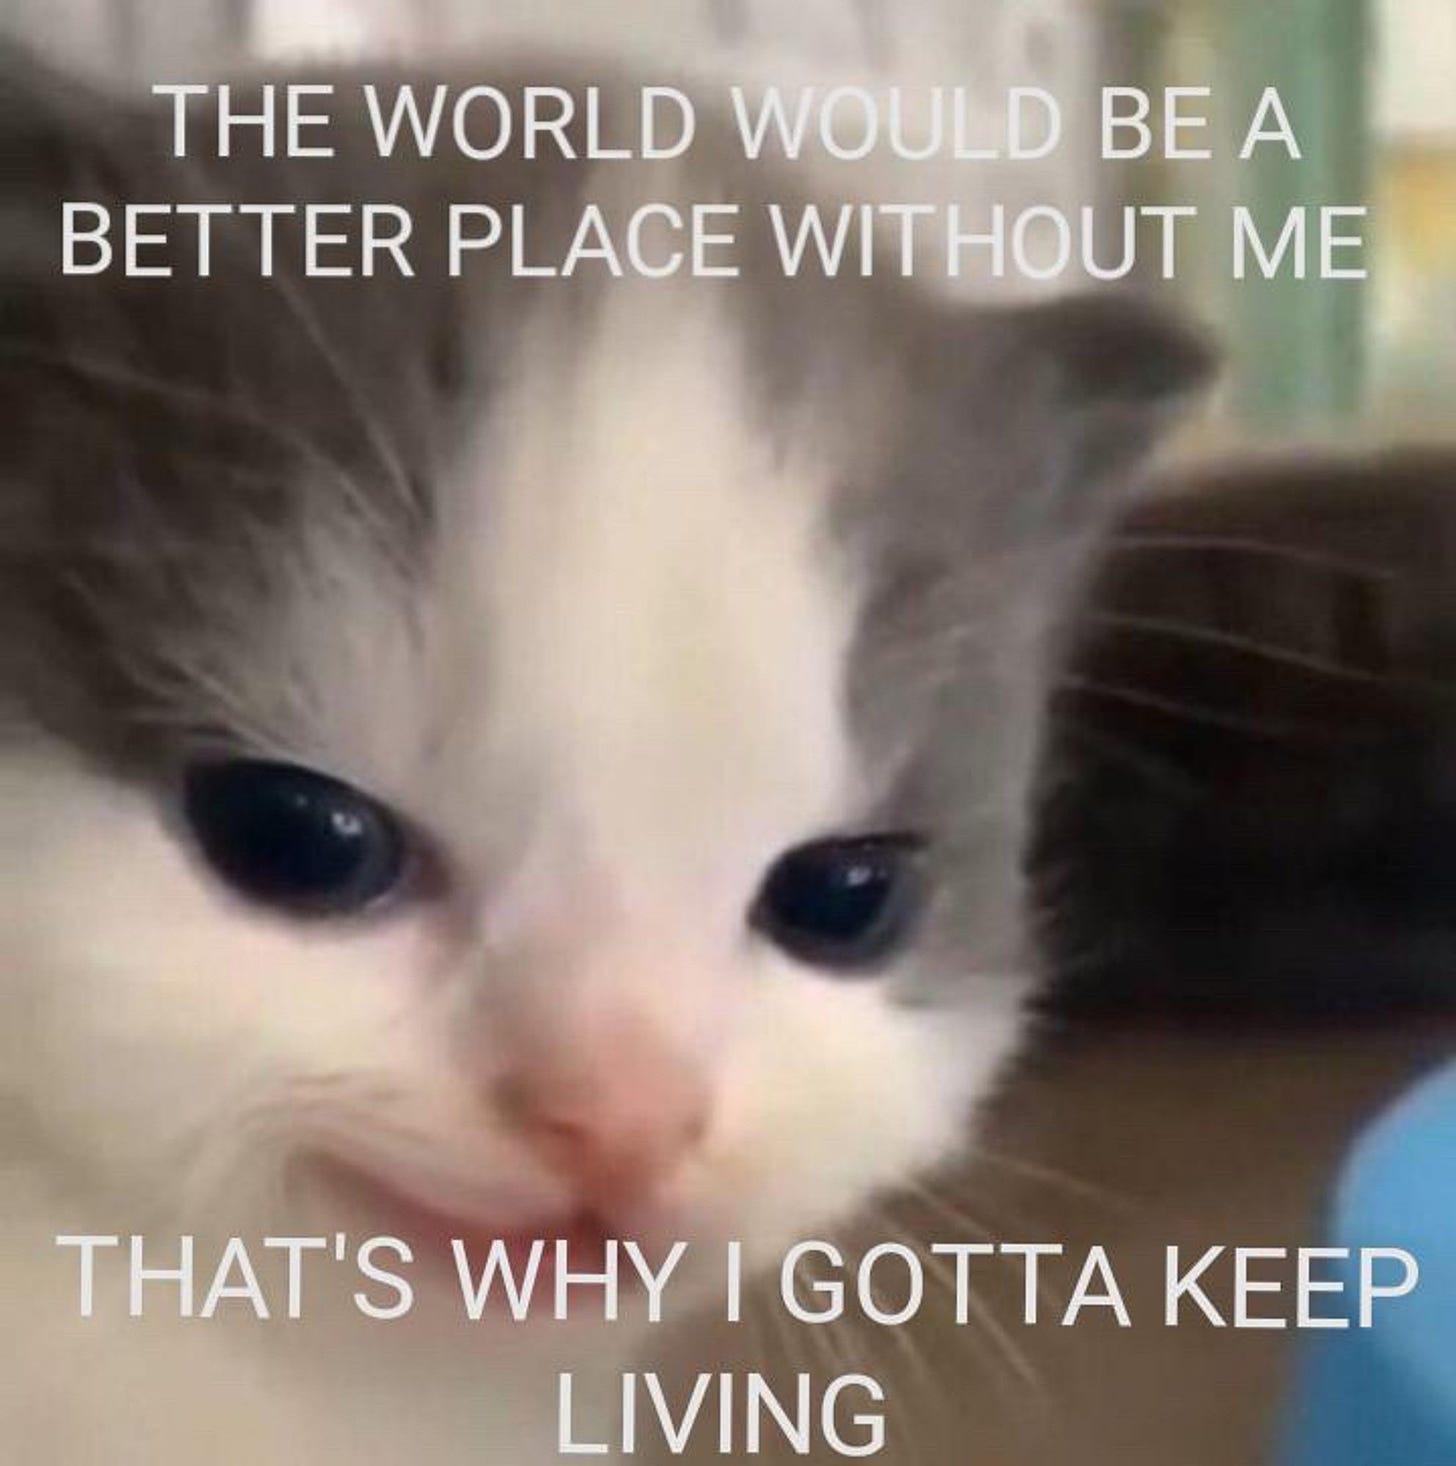 A meme image featuring a cute white and grey kitten, photoshopped to make it look like it's grinning, with the text "the world would be a better place without me" at the top and at the bottom "that's why I gotta keep living" 